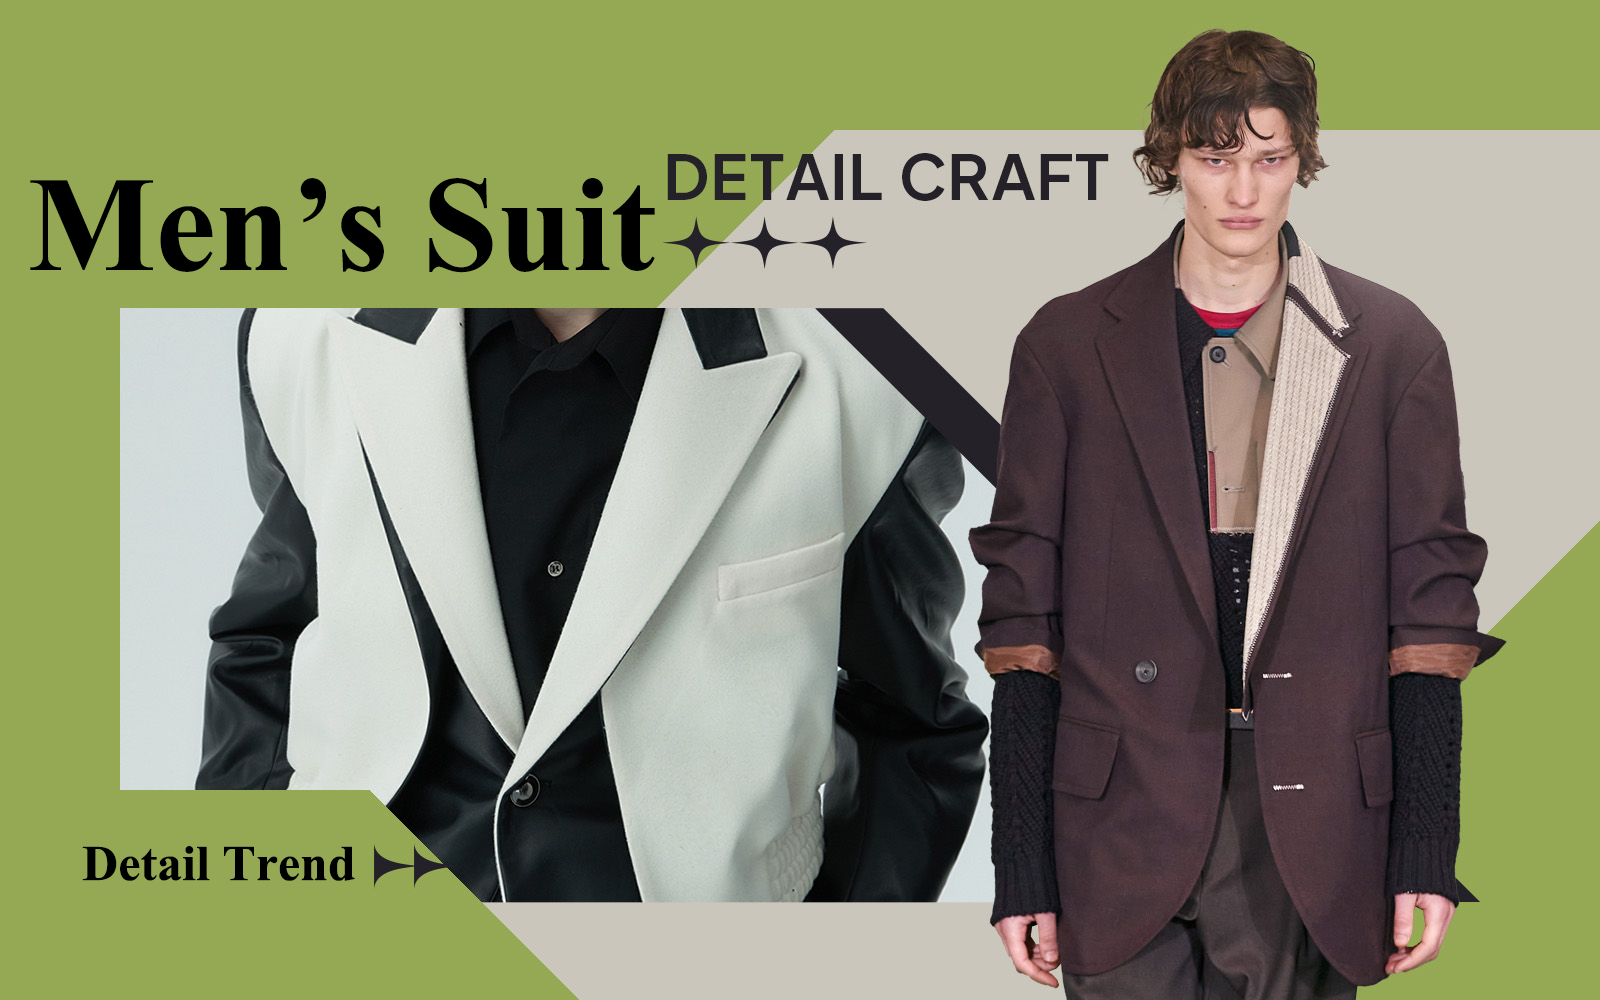 Localized Design -- The Detail & Craft Trend for Men's Suit